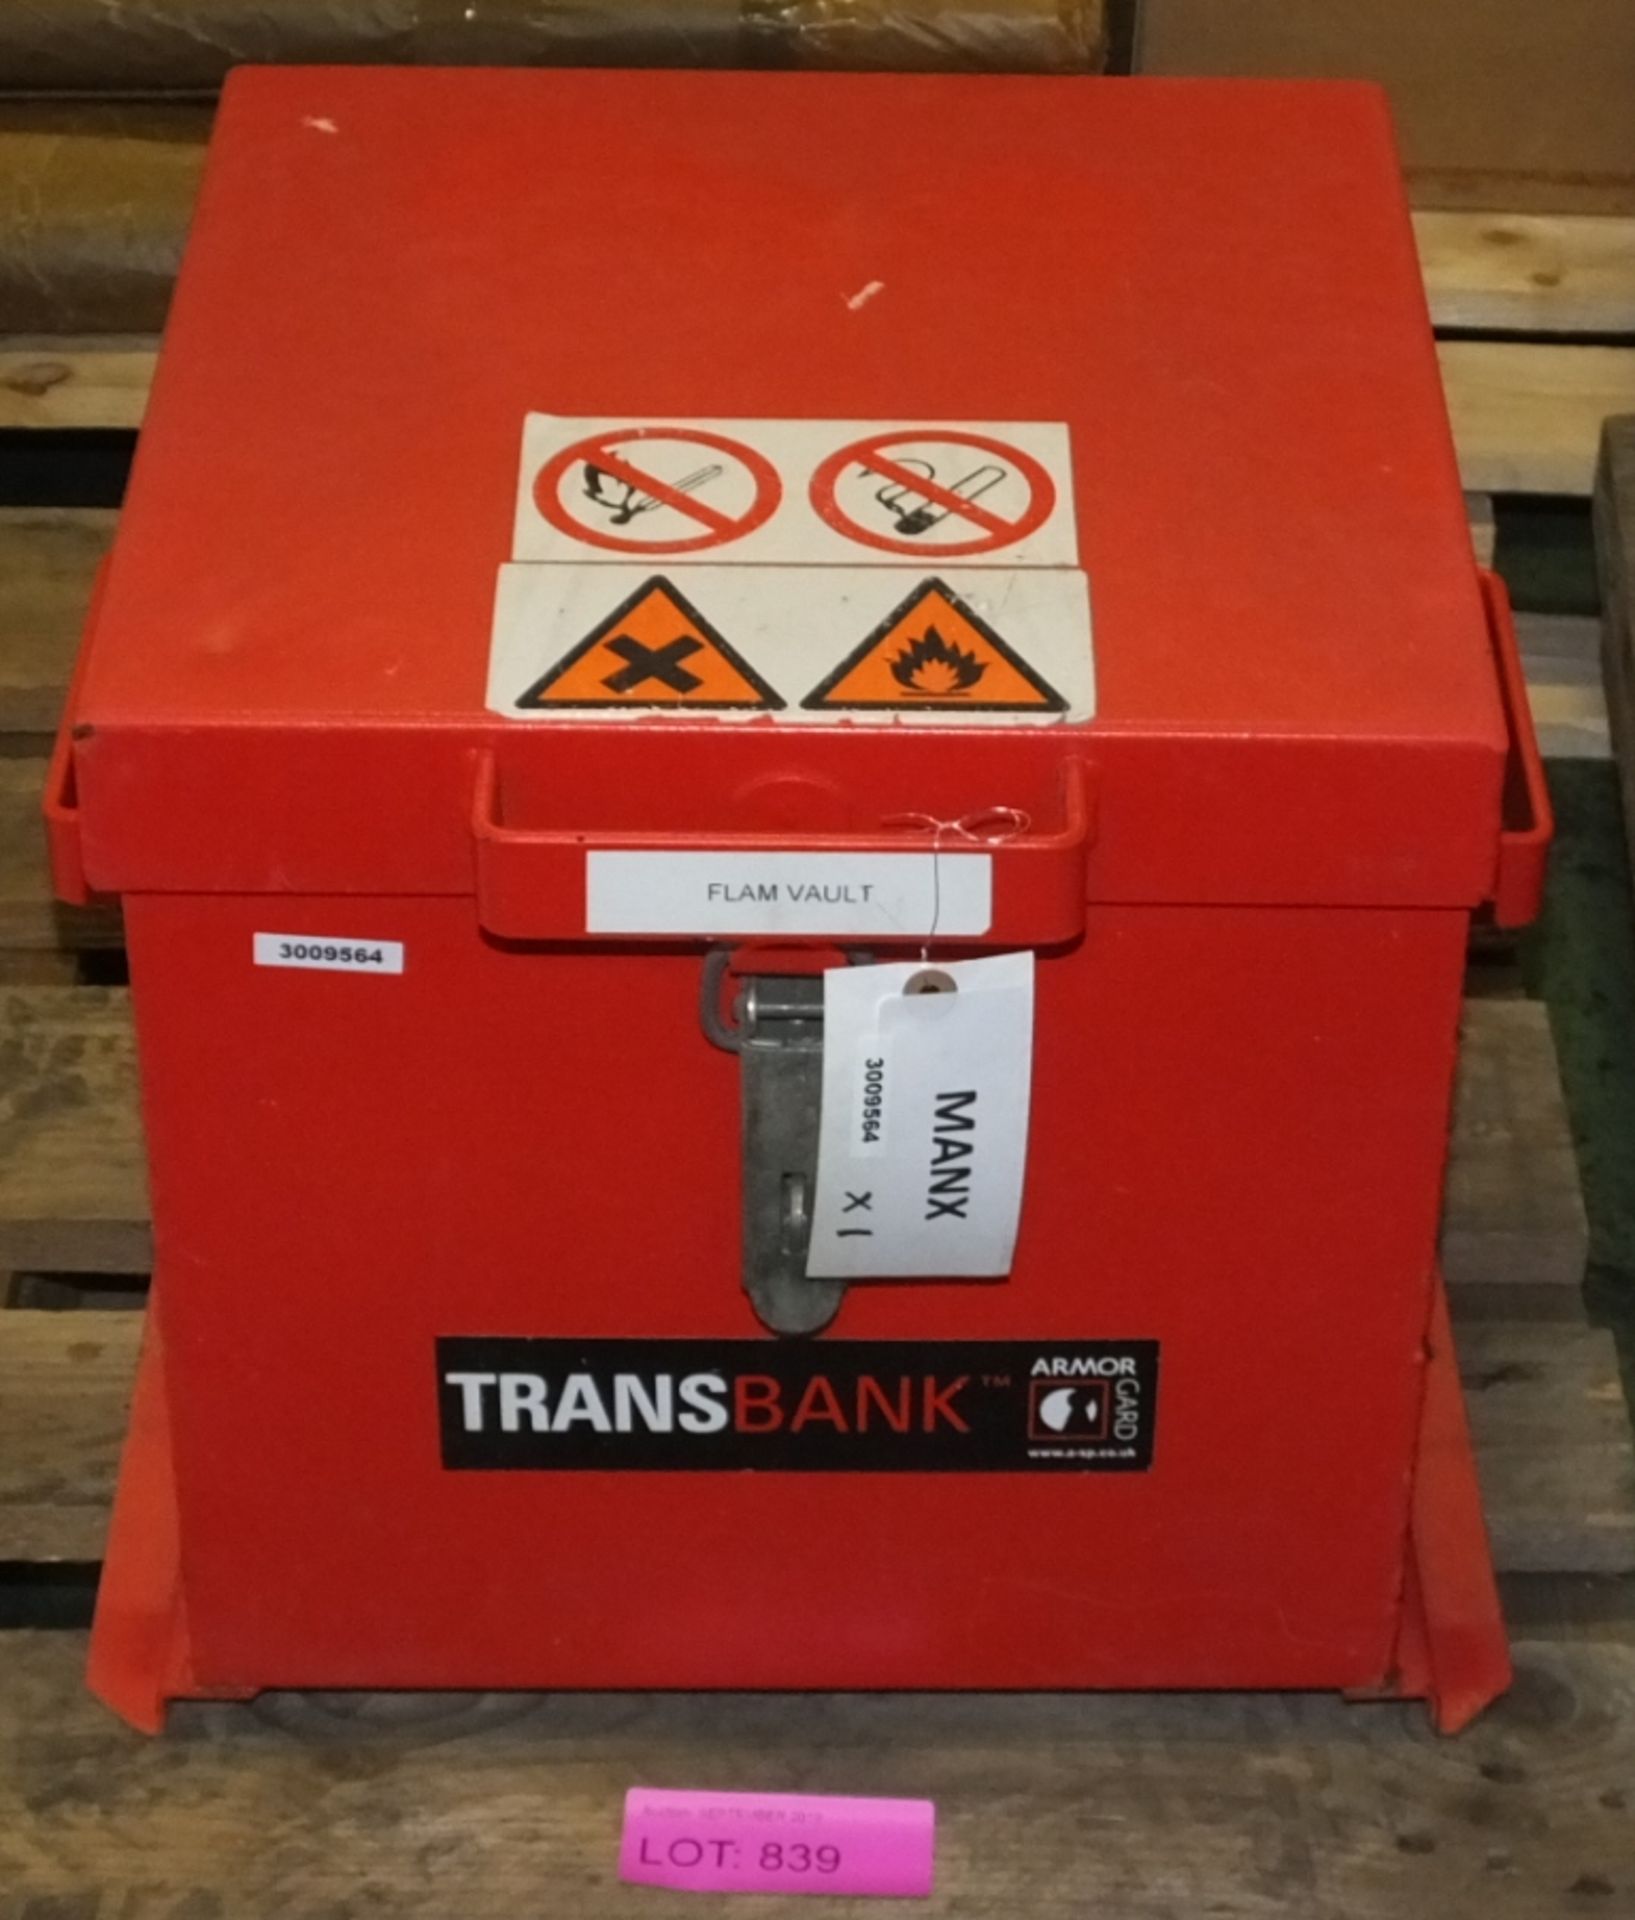 Armor Gard Trans Bank Small Chemical Cabinet L360 x W410 x H360mm